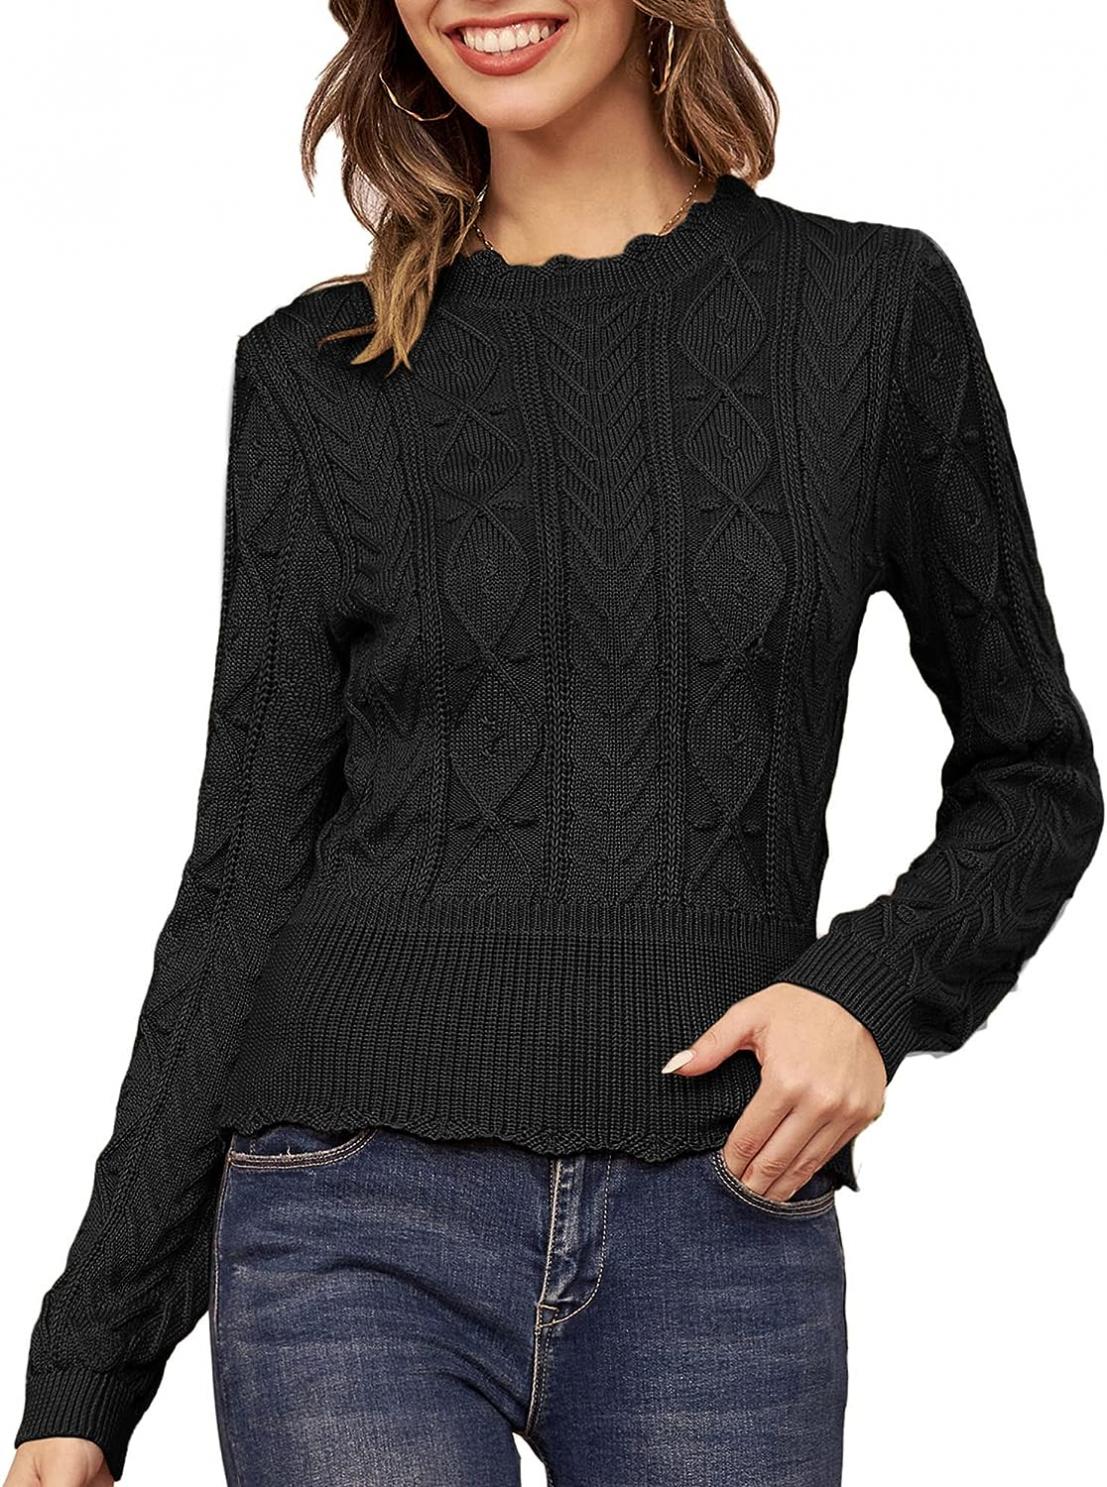 GRACE KARIN Womens Long Sleeve Sweater Cable Crew Neck Chunky Knitwear